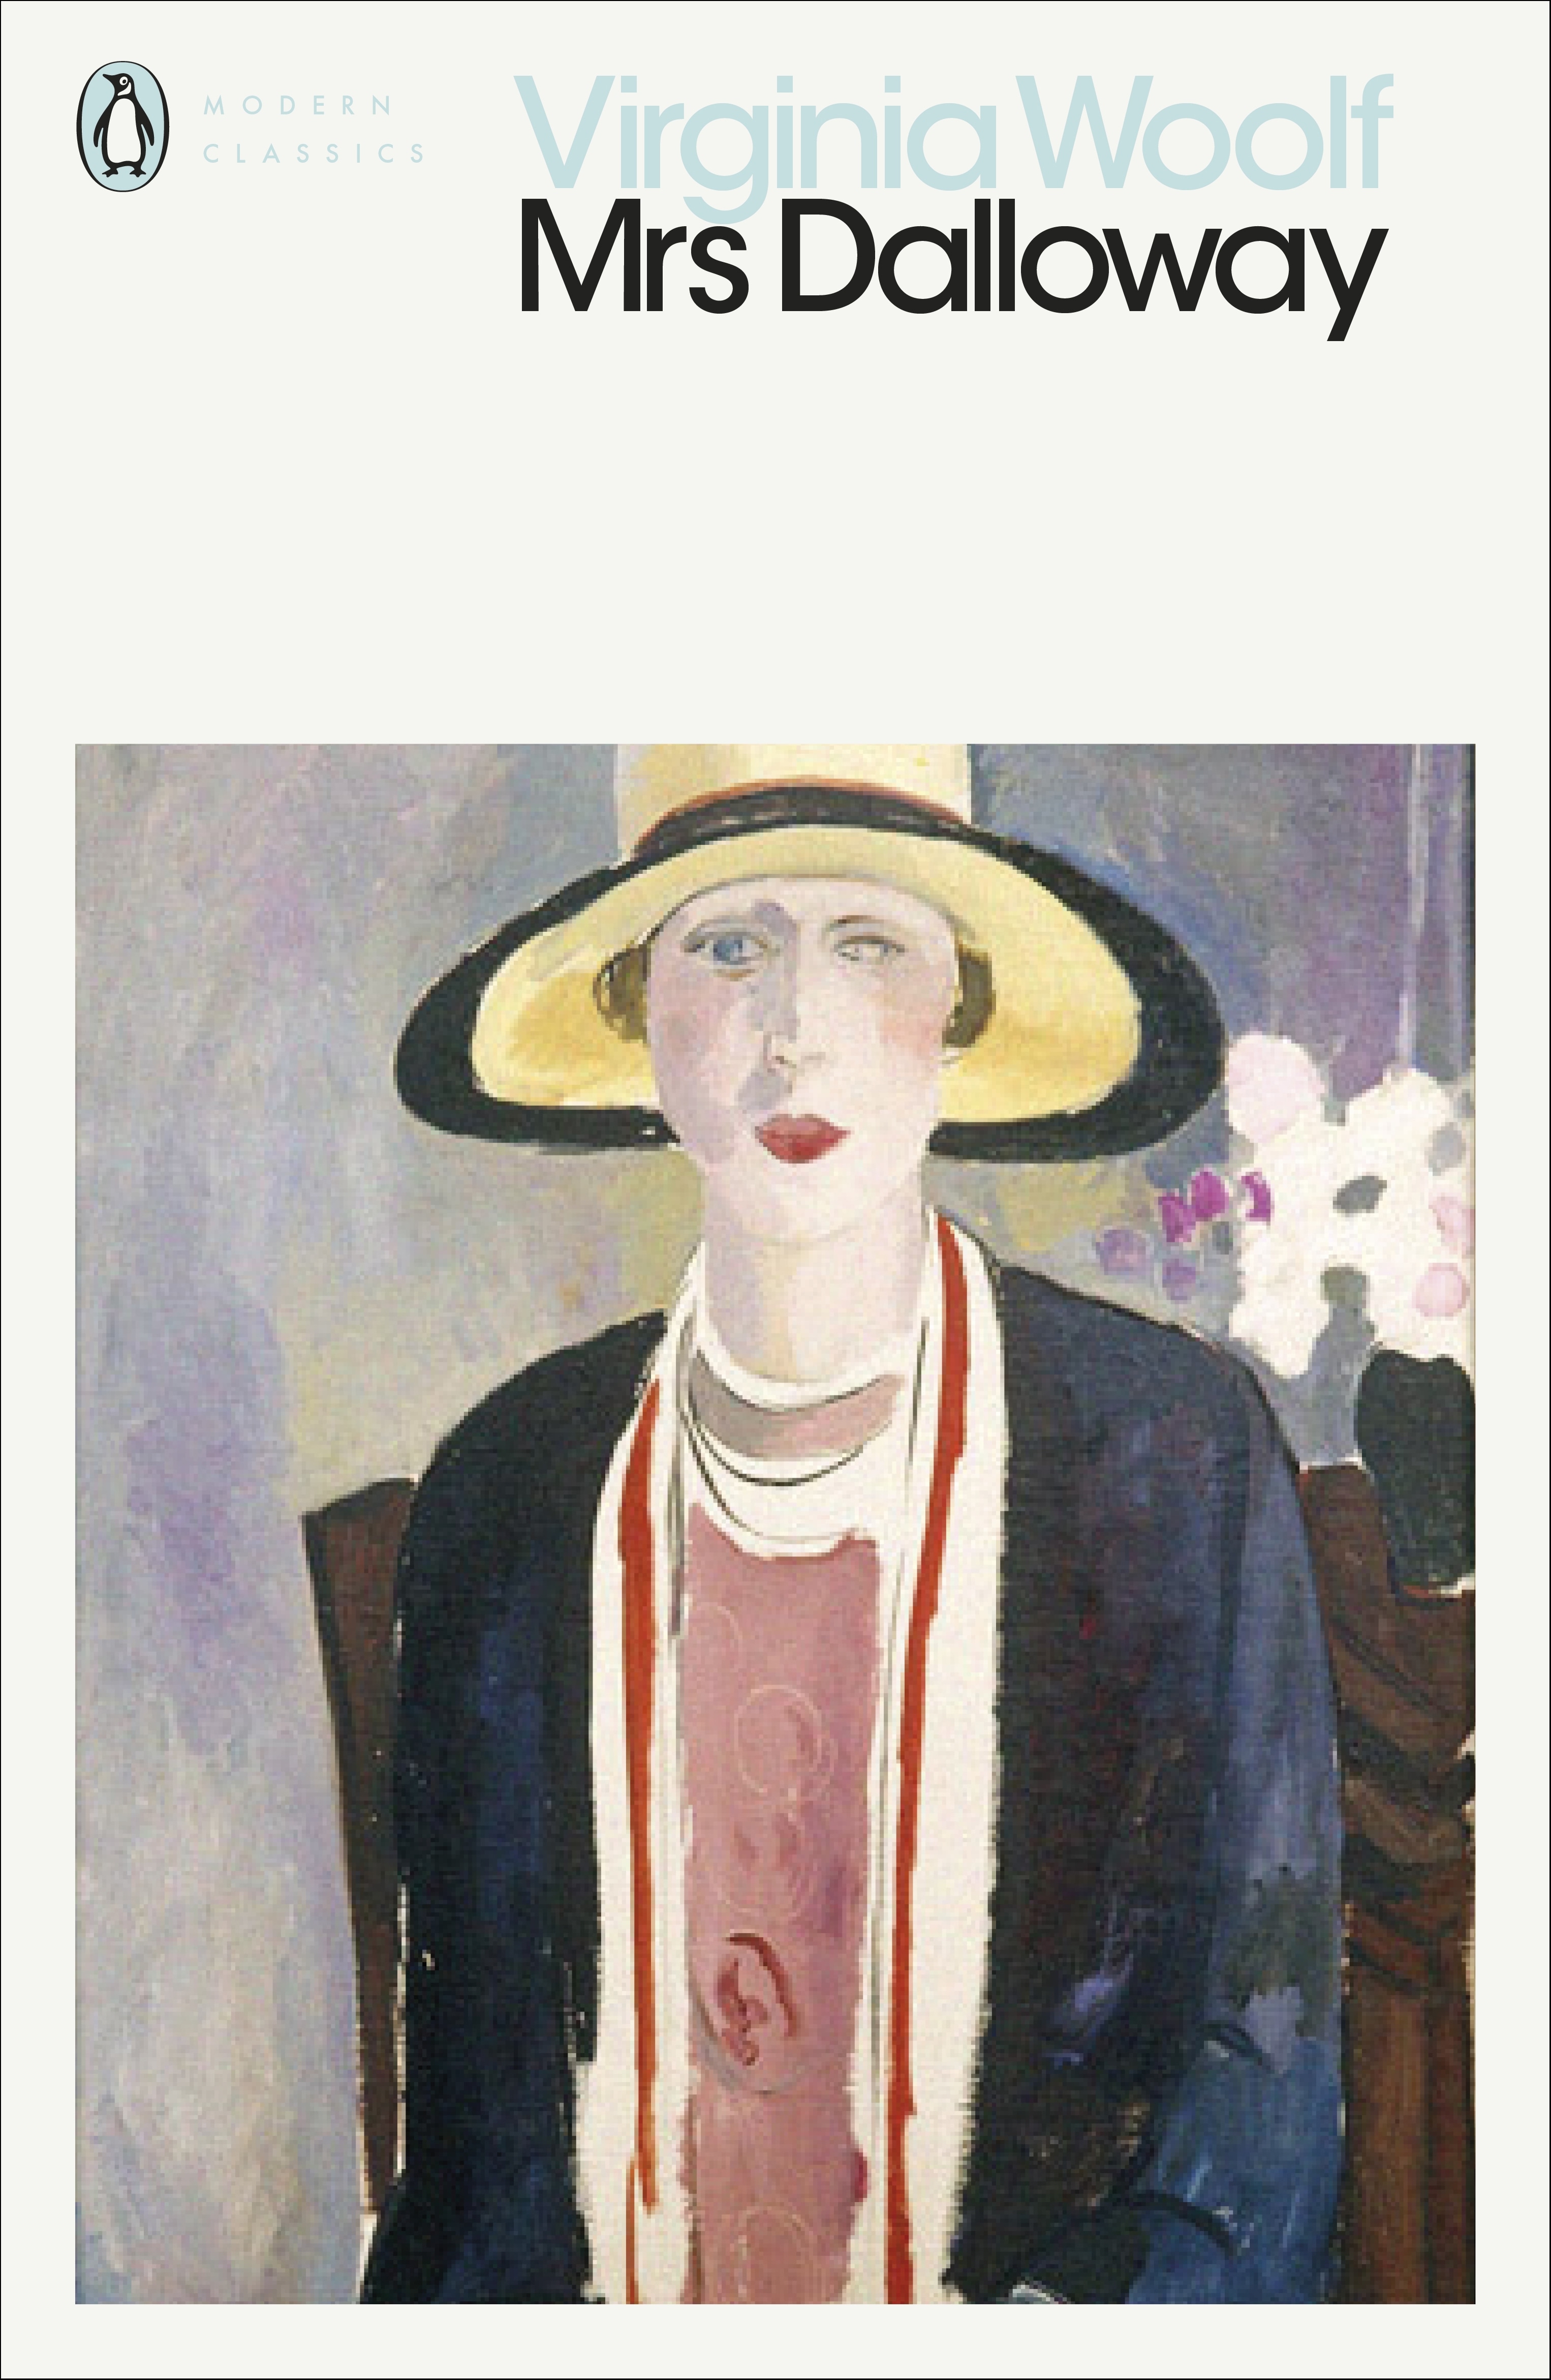 Book “Mrs Dalloway” by Virginia Woolf — July 30, 2020